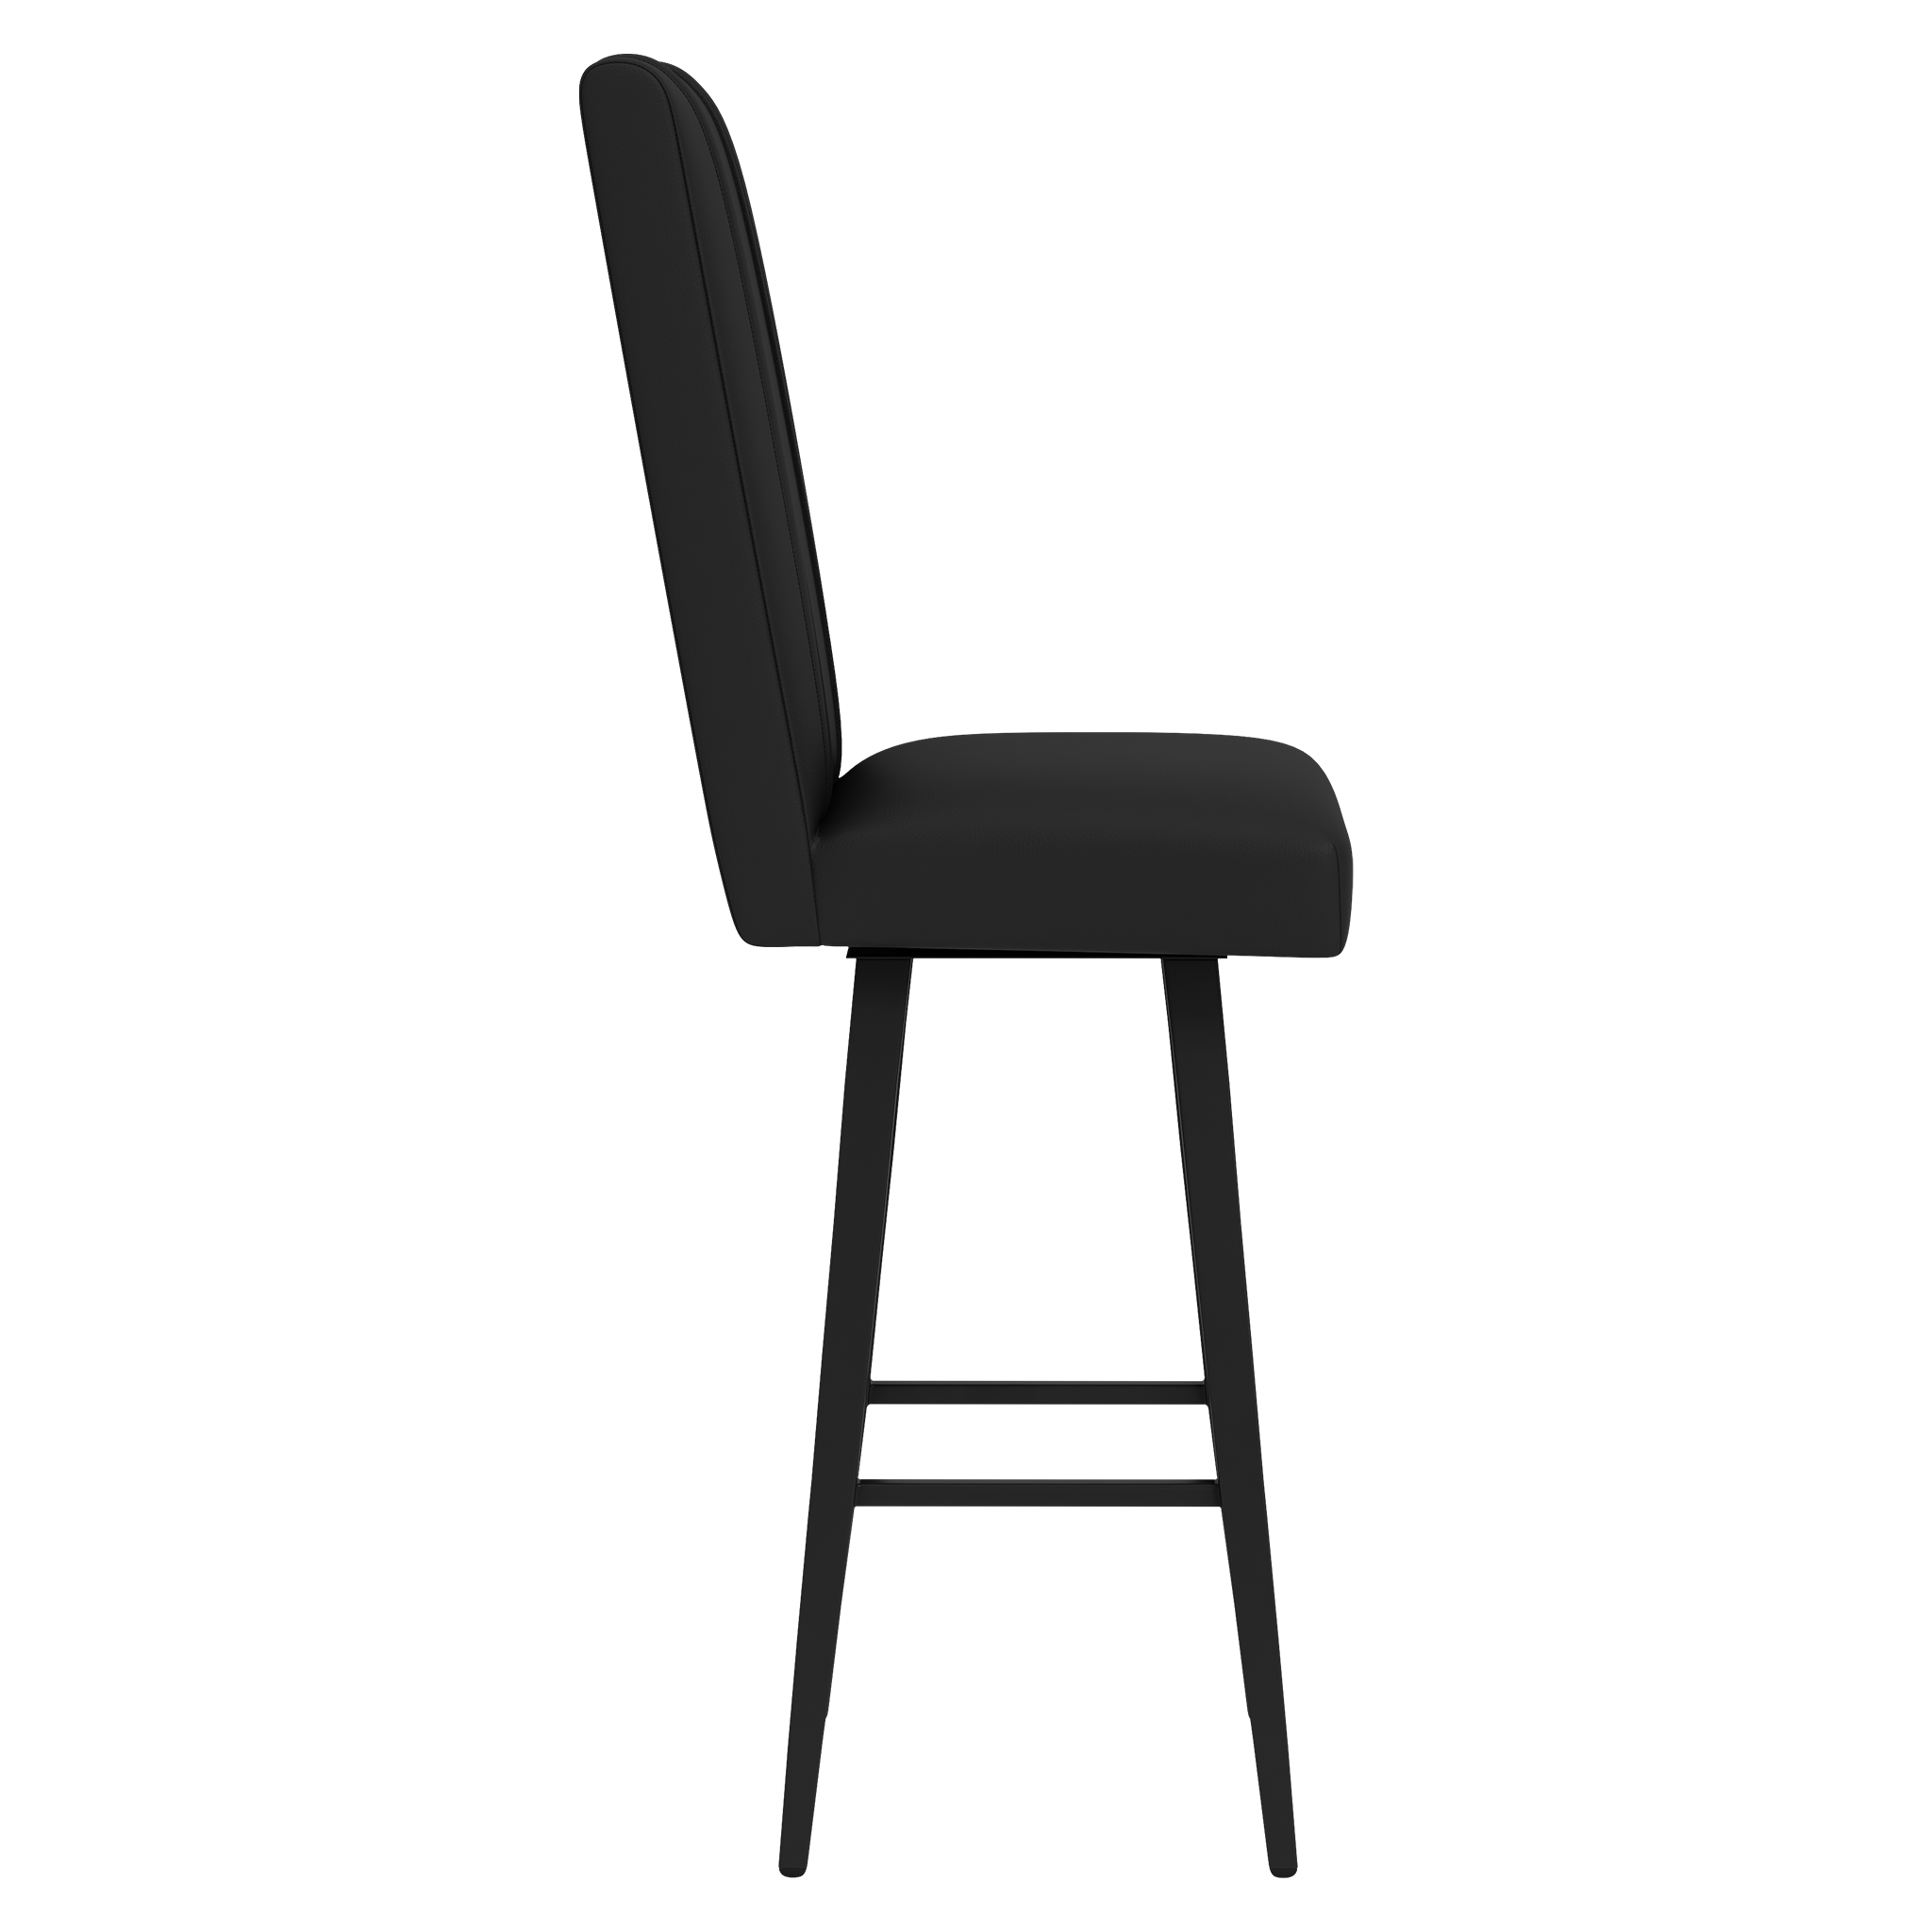 Swivel Bar Stool 2000 with Milwaukee Braves Cooperstown Secondary